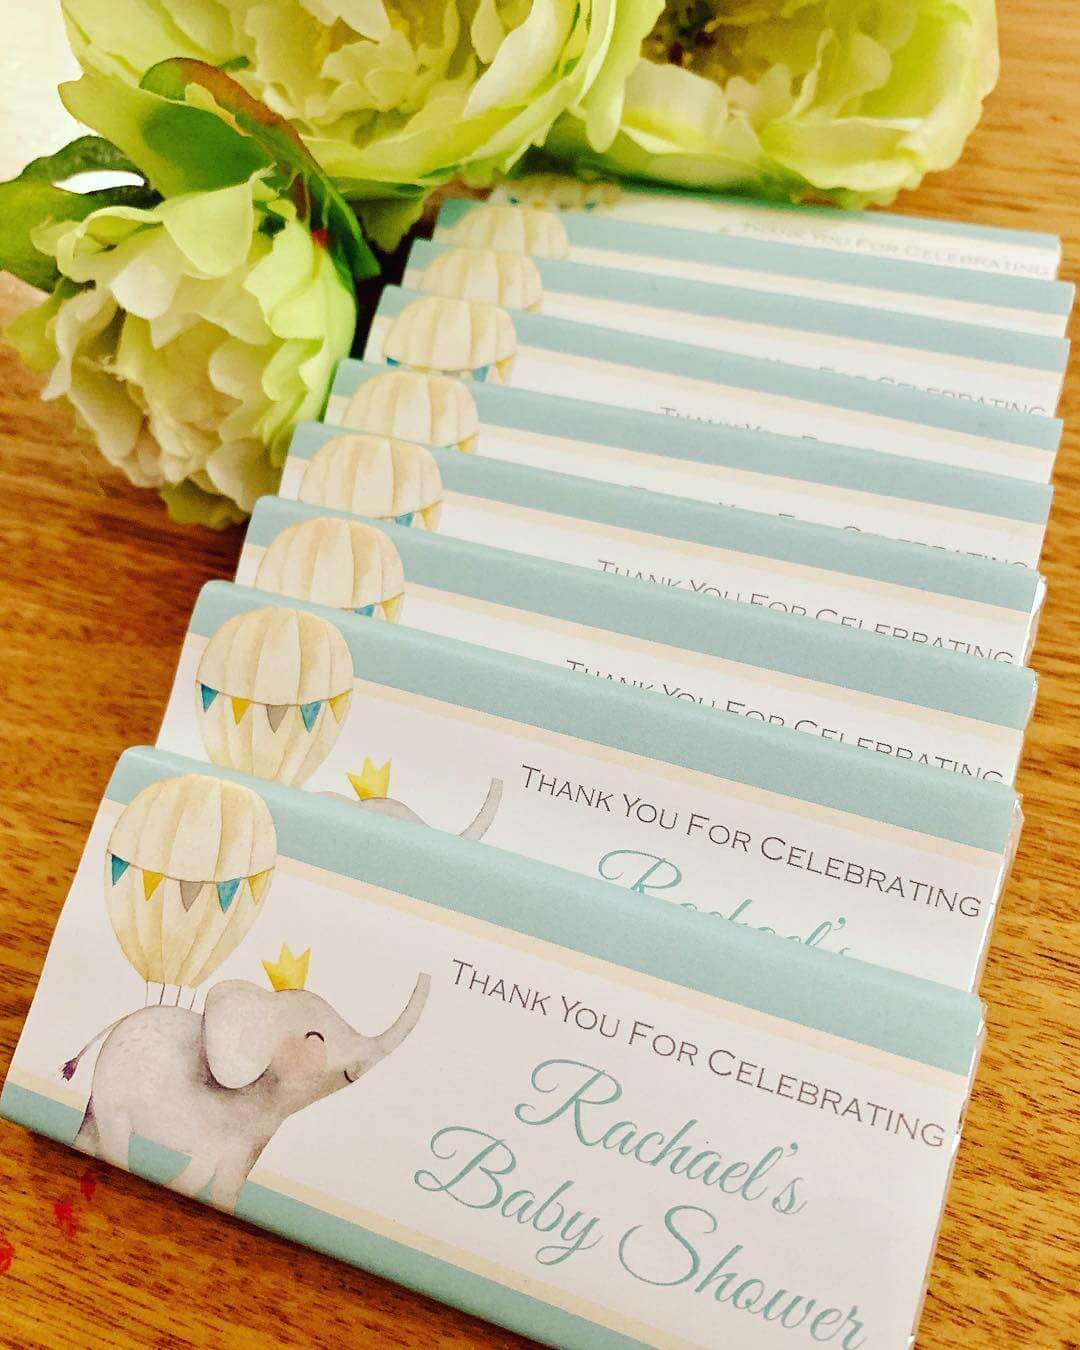 Personalised Chocolate Bar Favours